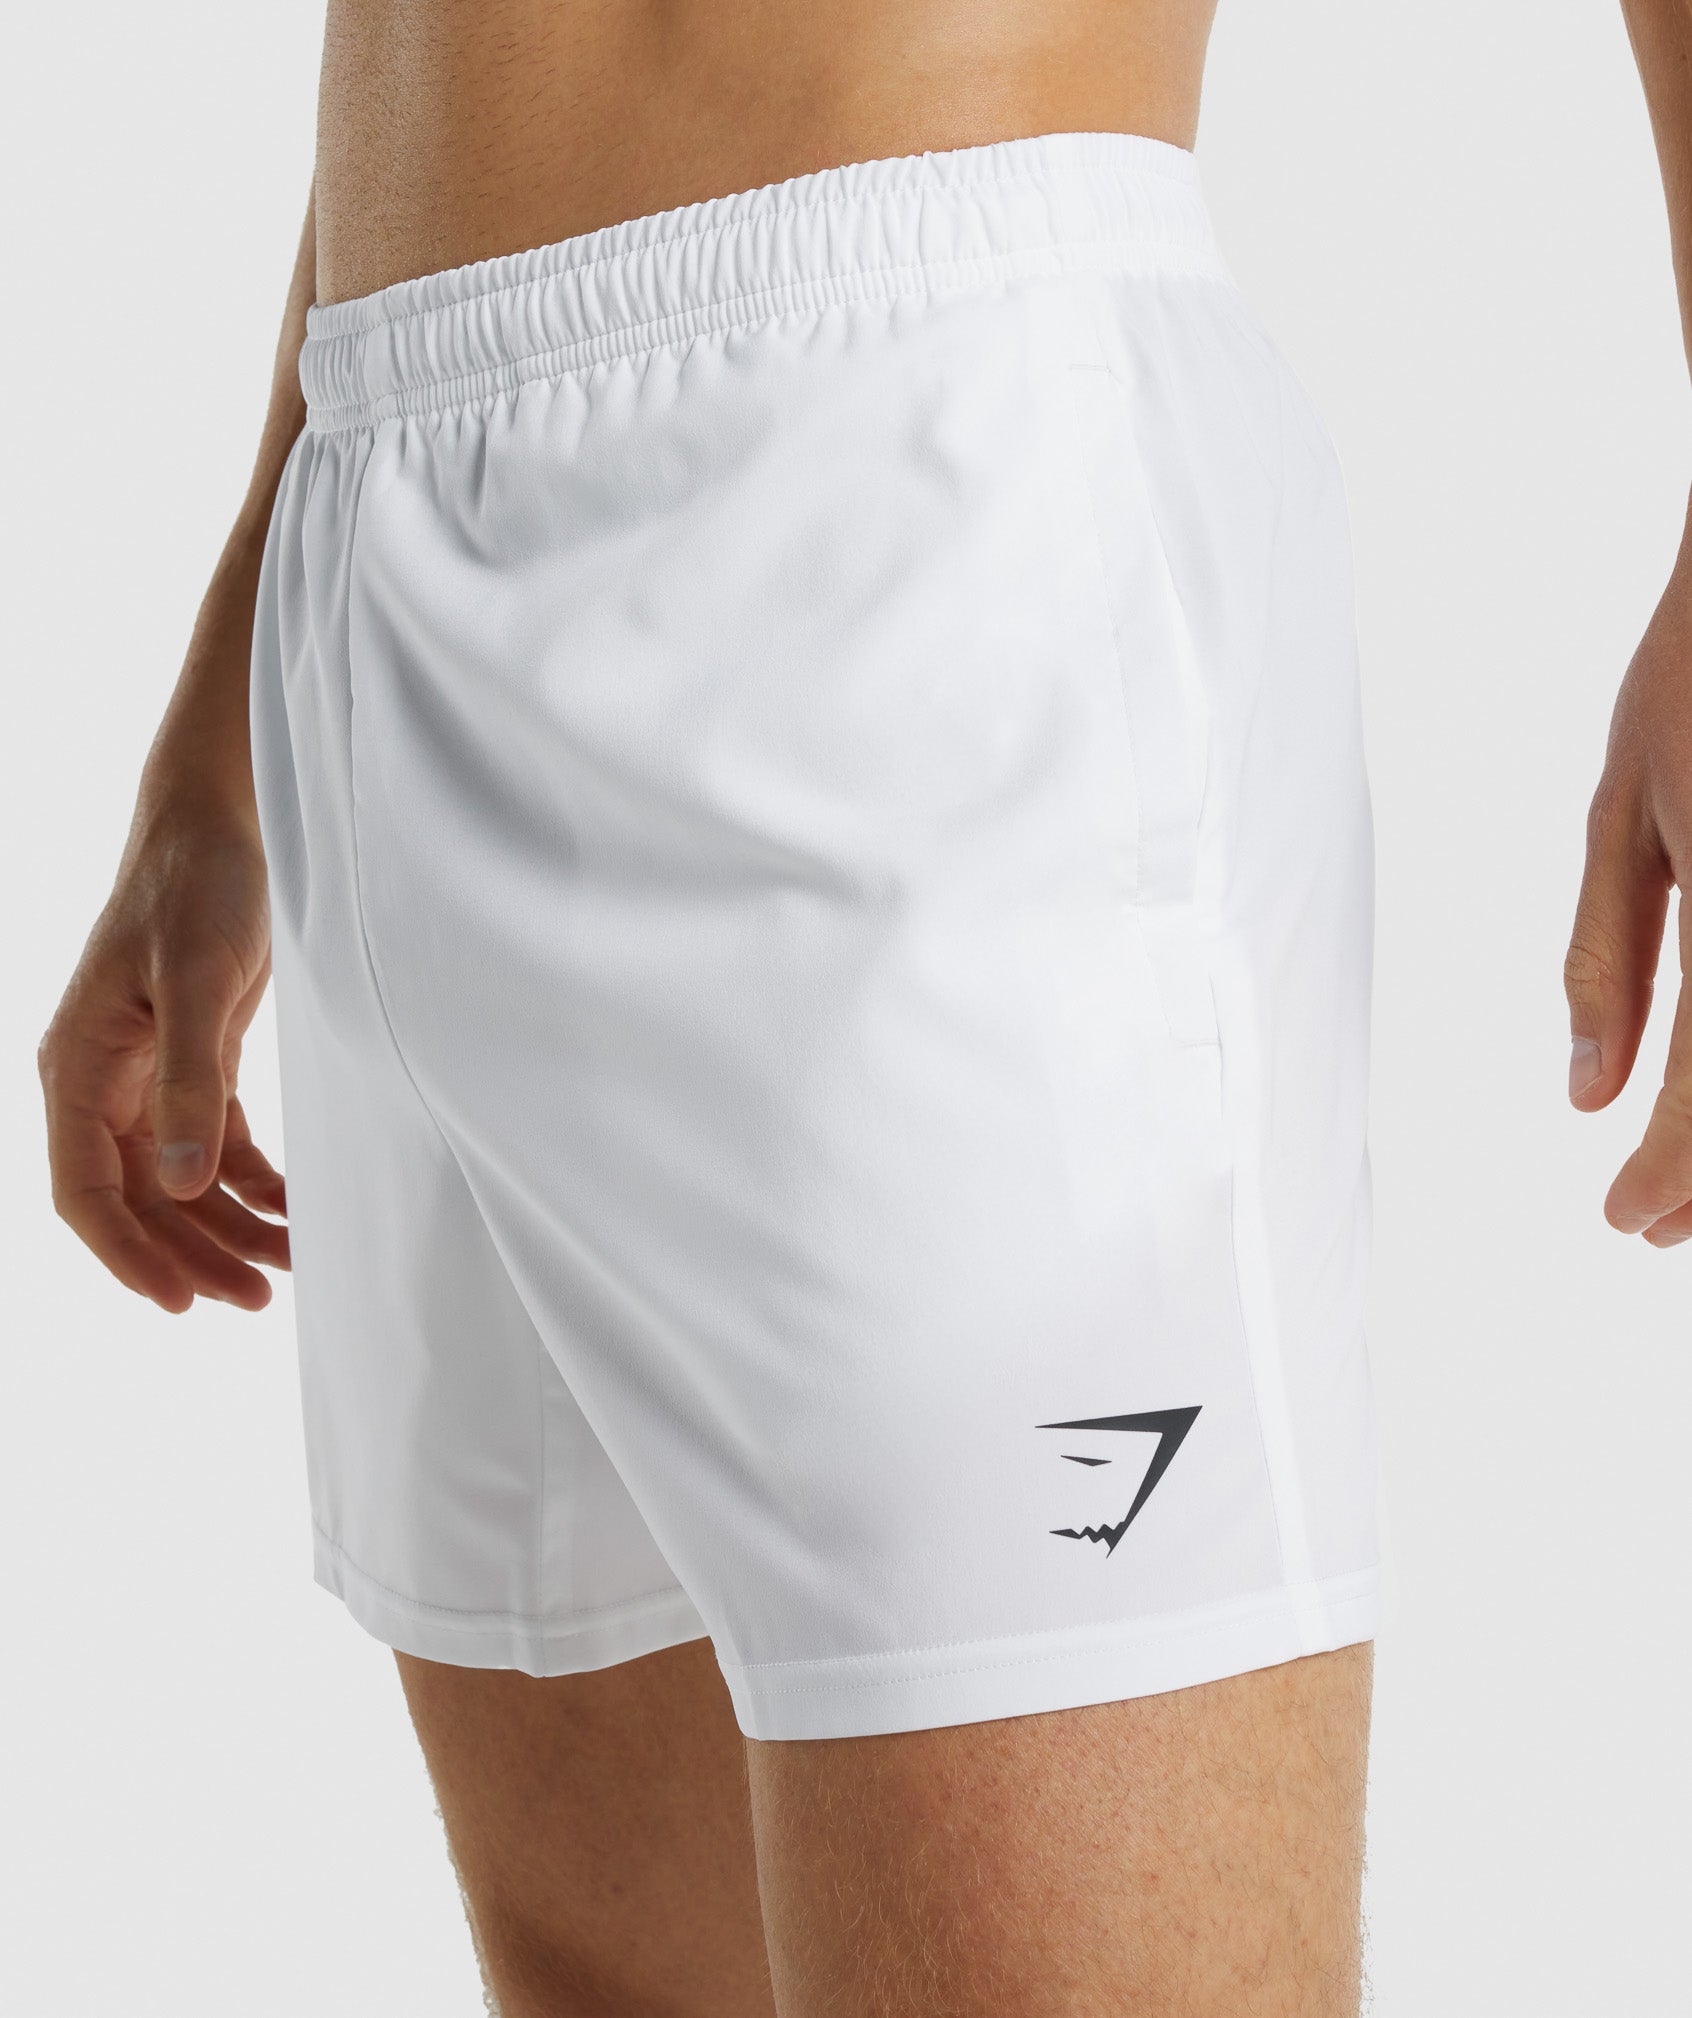 Arrival 5" Shorts in White